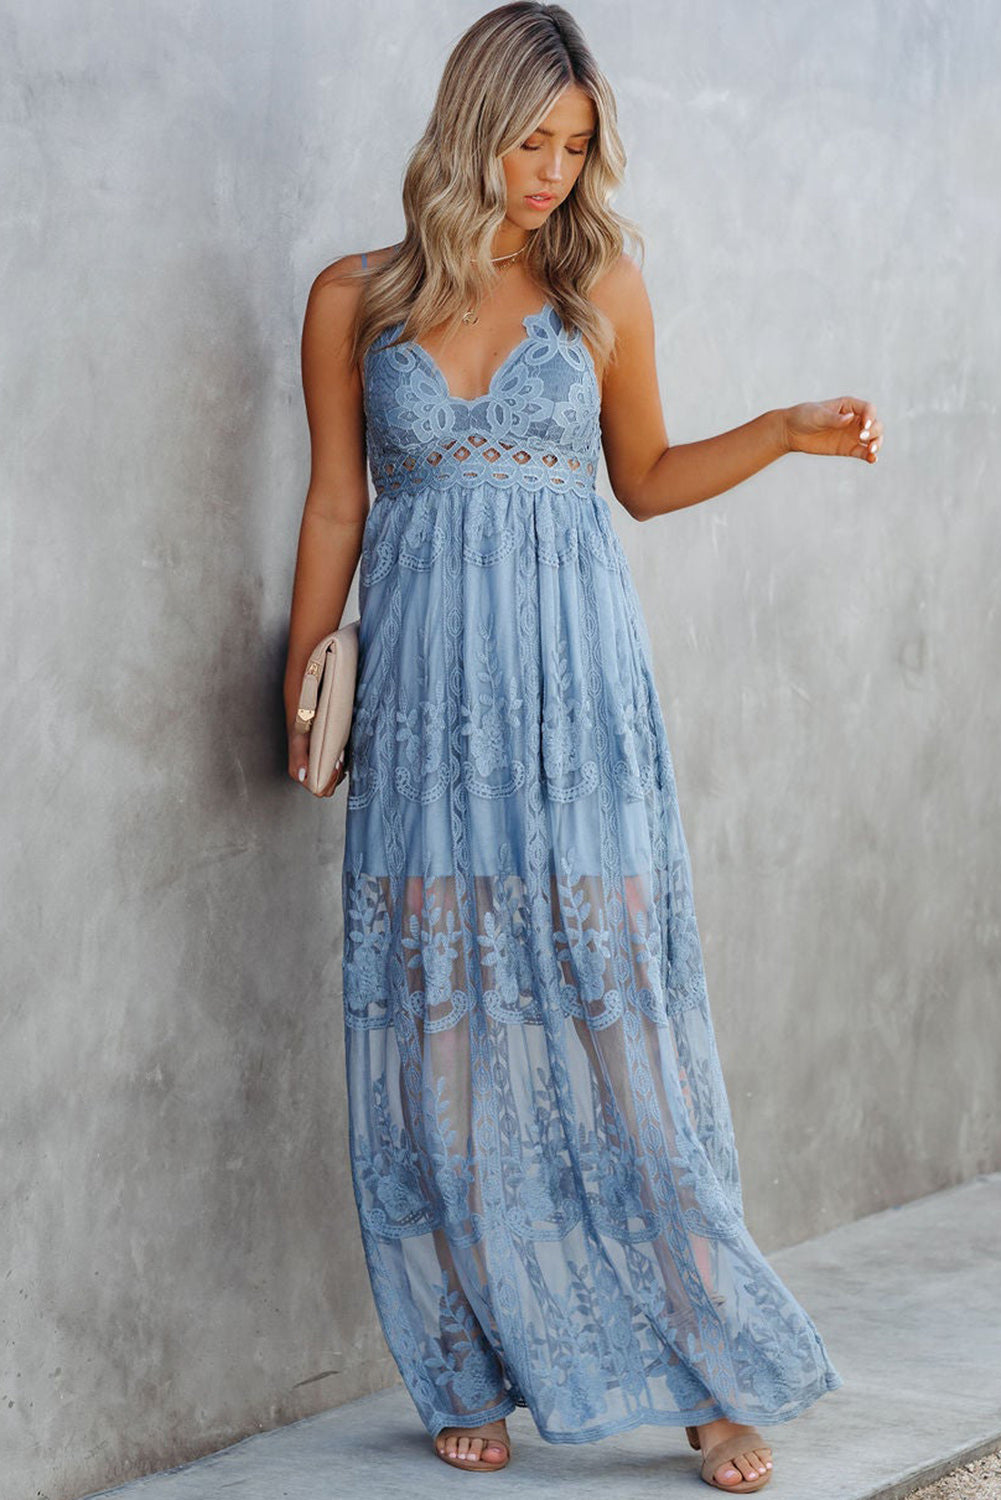 Sky Blue White Maxi Dress Lace Crisscross Backless Cocktail Party Maxi Long Dress LC619278-4